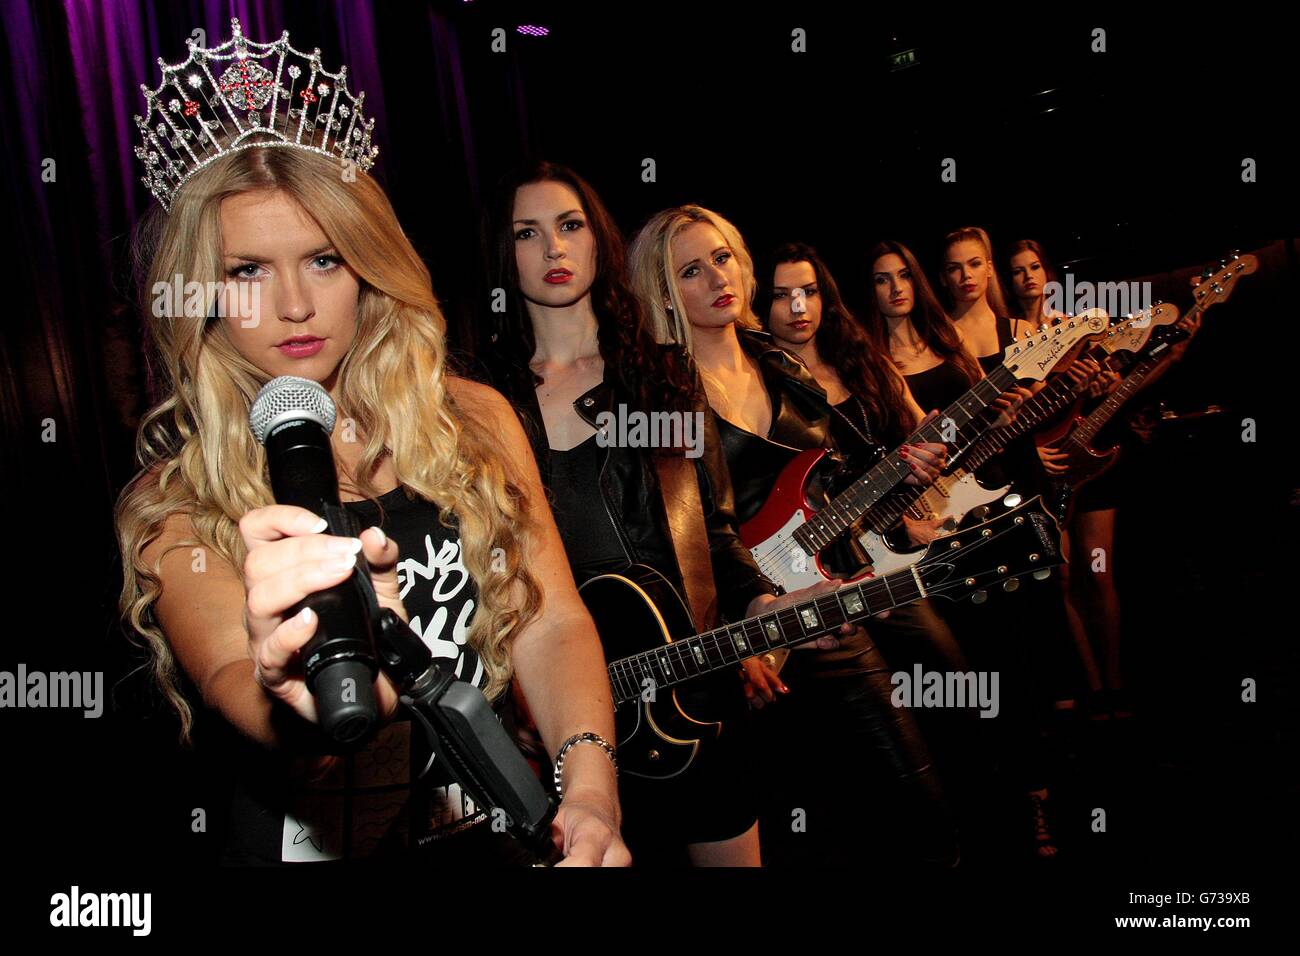 (Left to right) The current Miss England Kirsty Heslewood, 25, with finalists Miss English Riviera, Leanne Ward, 24, Miss Cheltenham, Sophie Smith, 23, Miss Leicestershire, Holly Desai, 22, Miss Bedfordshire, Jasmine Chavda, 23, Miss London, Tammy Dexter, 20 and Miss Cambridgeshire Carina Tyrrell, 24, during a rock themed Miss England 2014 photocall at the Hippodrome Theatre, London. Stock Photo